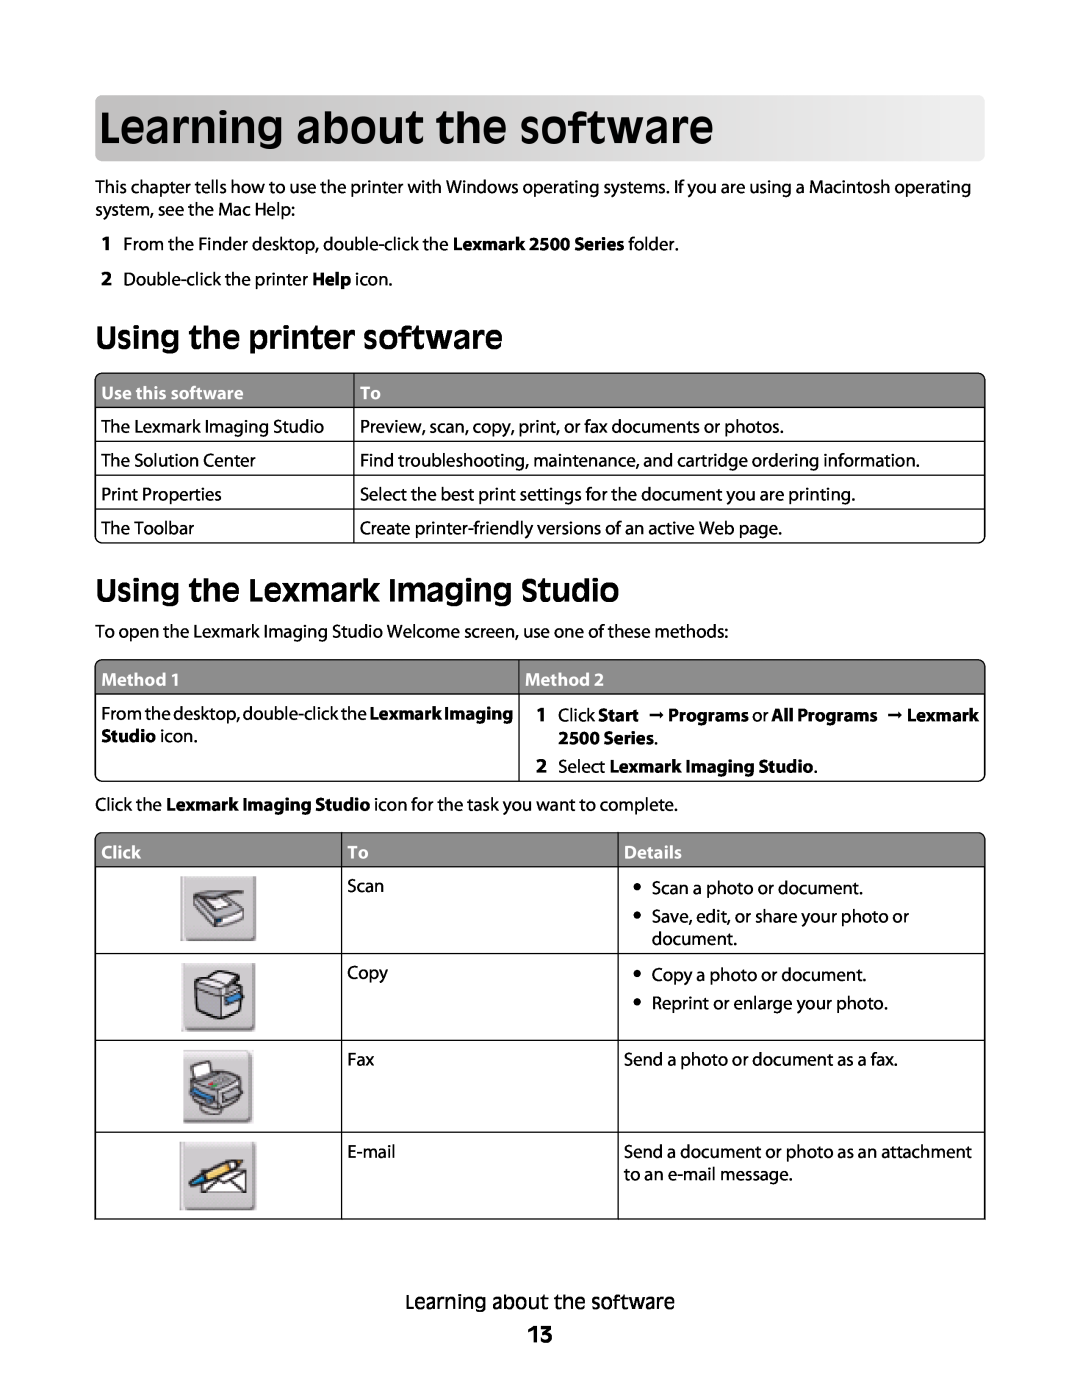 Lexmark 2500 Series Learningaboutthesoftware, Using the printer software, Using the Lexmark Imaging Studio, Method, Click 